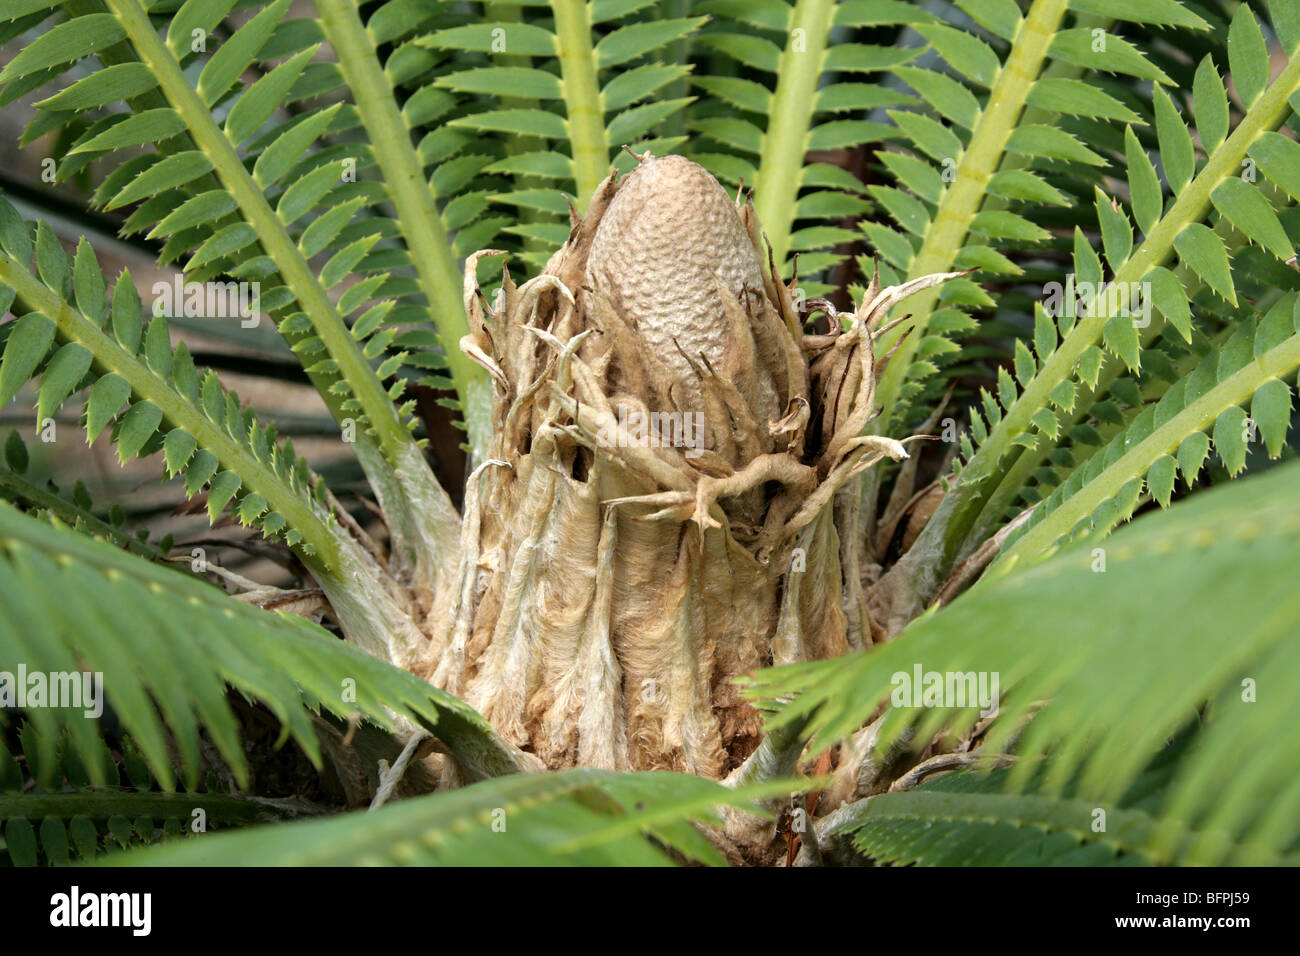 Gum Palm or Giant Dioon, Dioon spinulosum, Zamiaceae, Mexico. A Mexican Endemic Cycad. Stock Photo